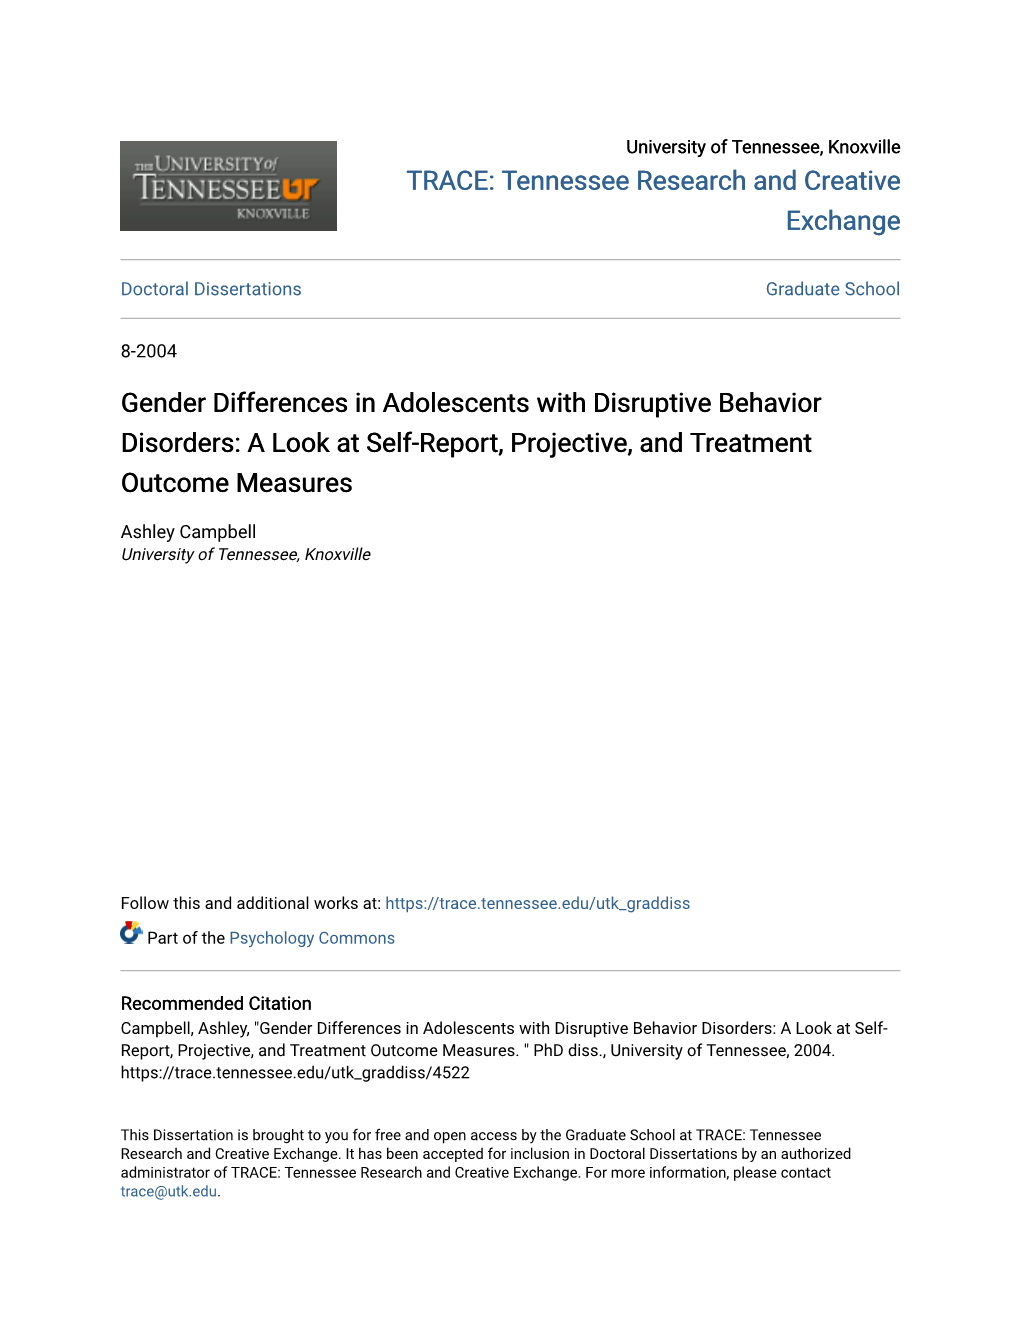 Gender Differences in Adolescents with Disruptive Behavior Disorders: a Look at Self-Report, Projective, and Treatment Outcome Measures